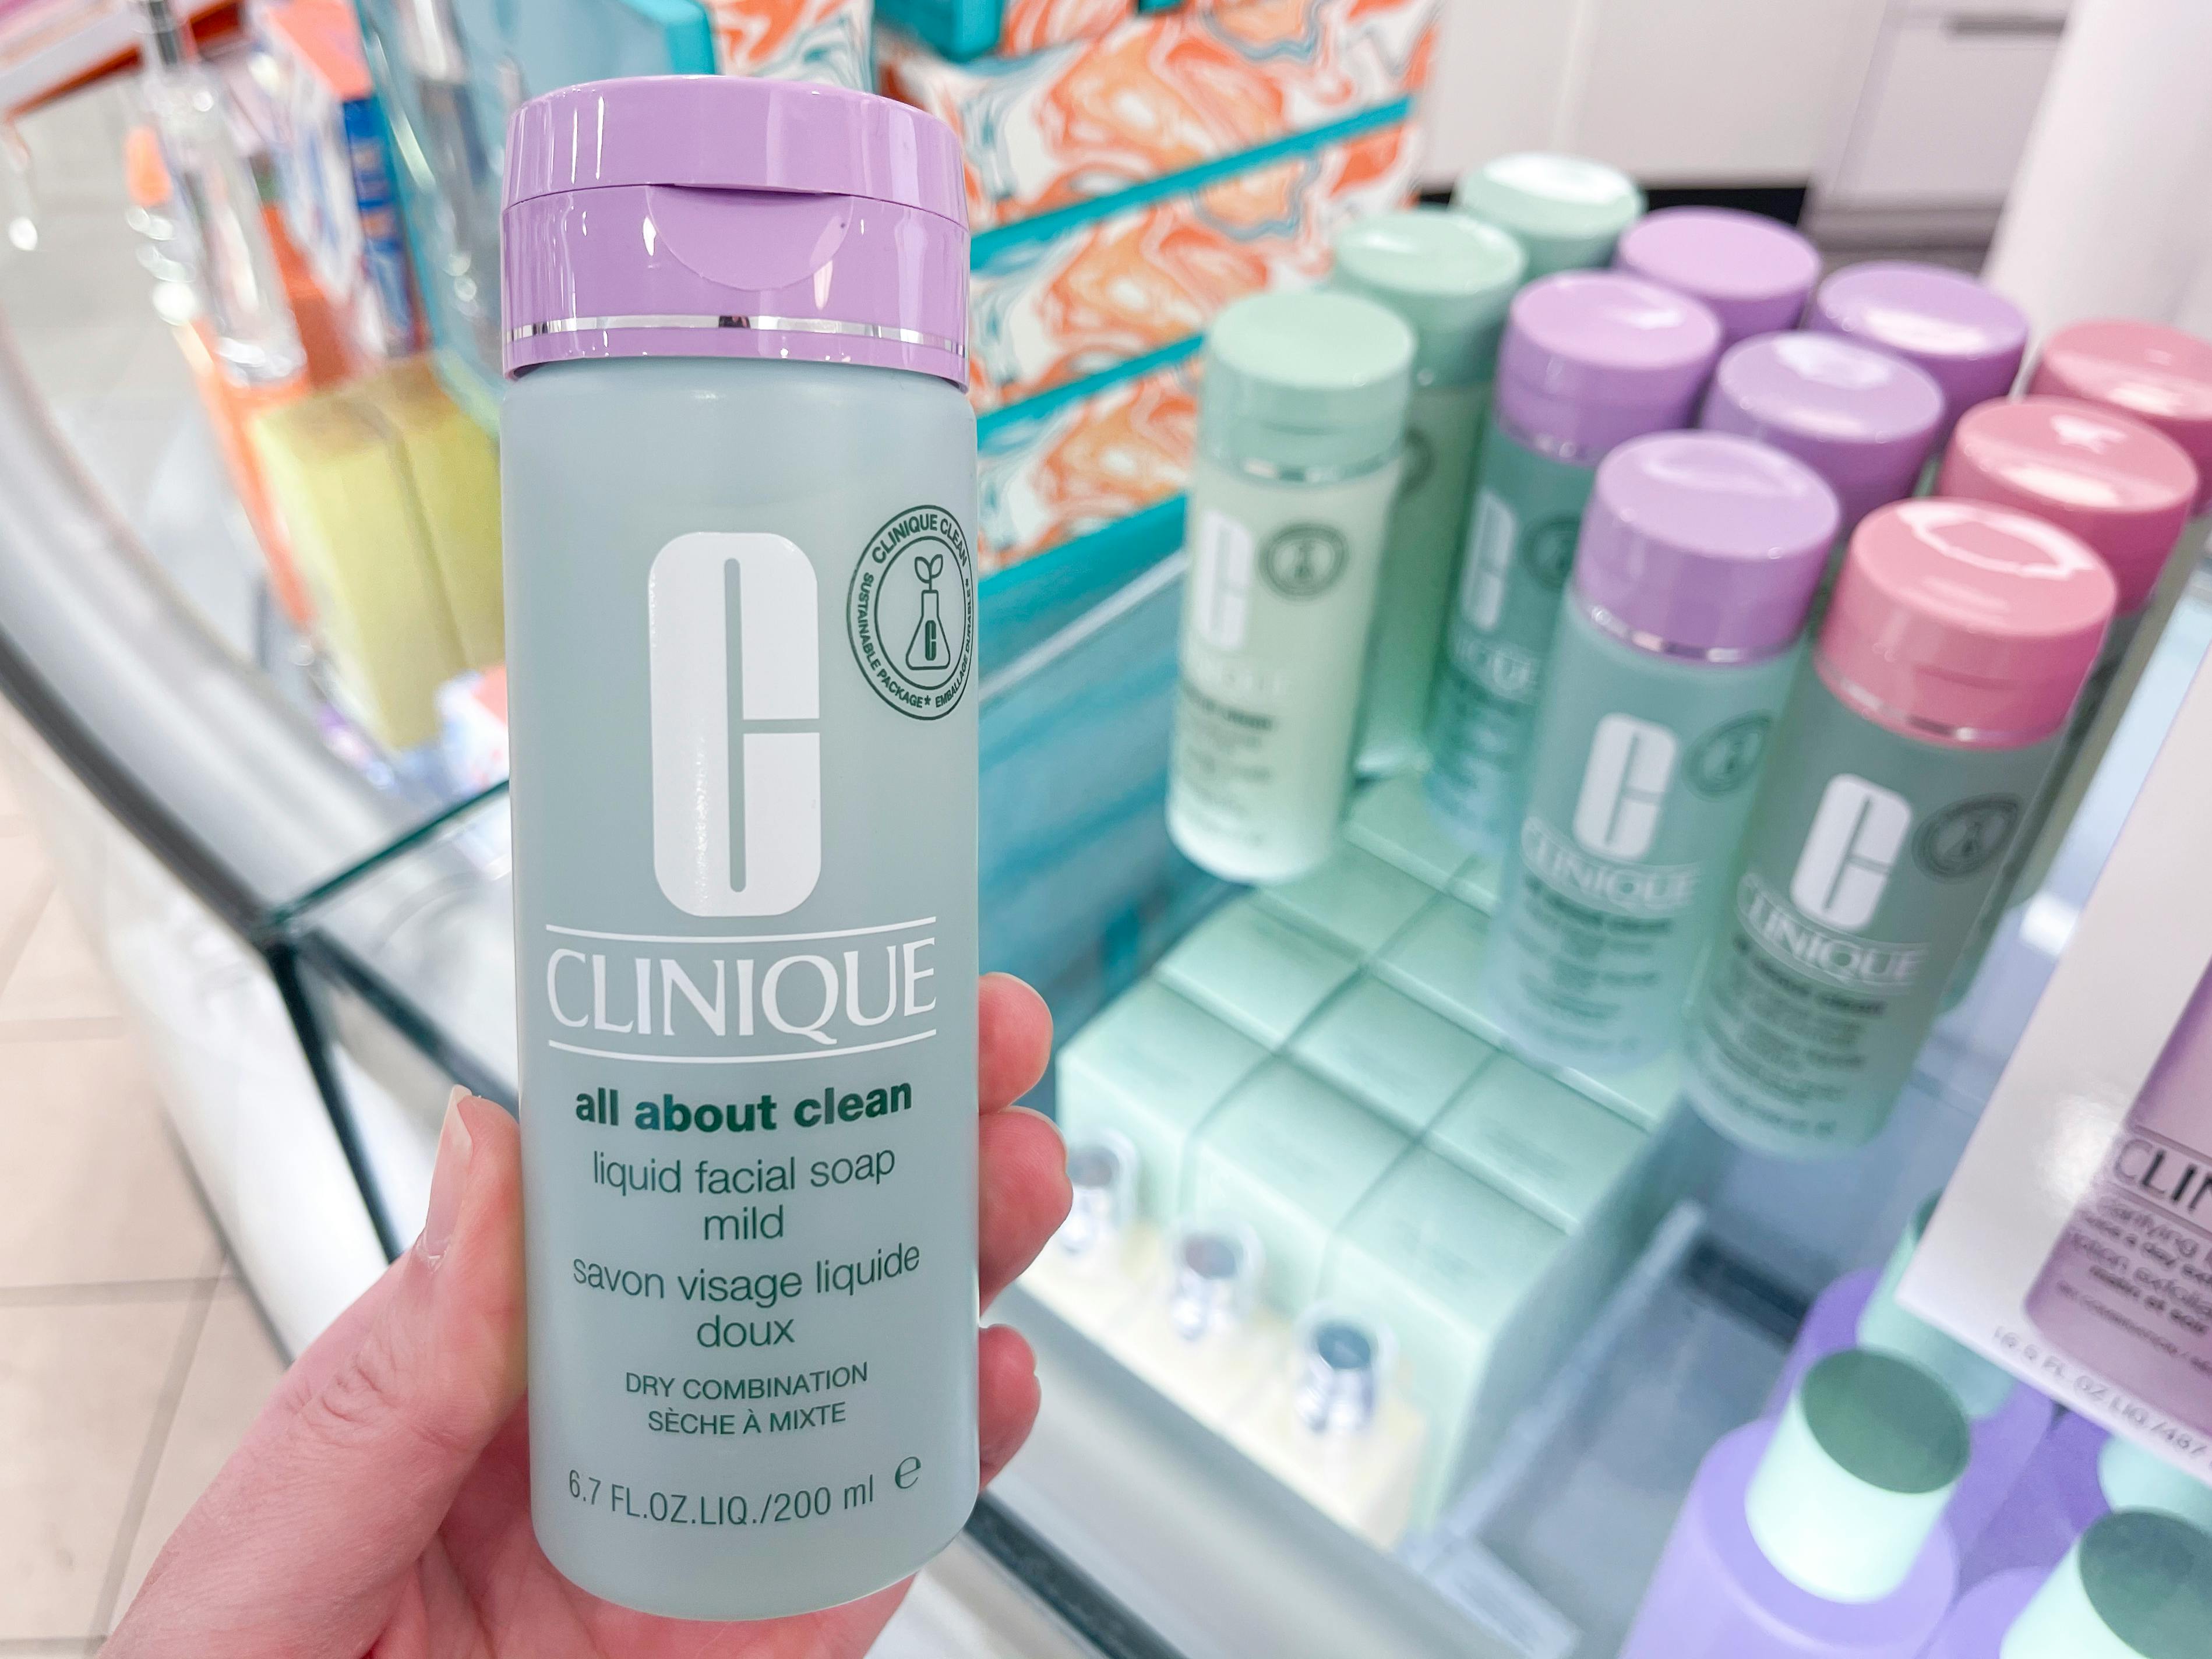 Clinique skin care at Macy's